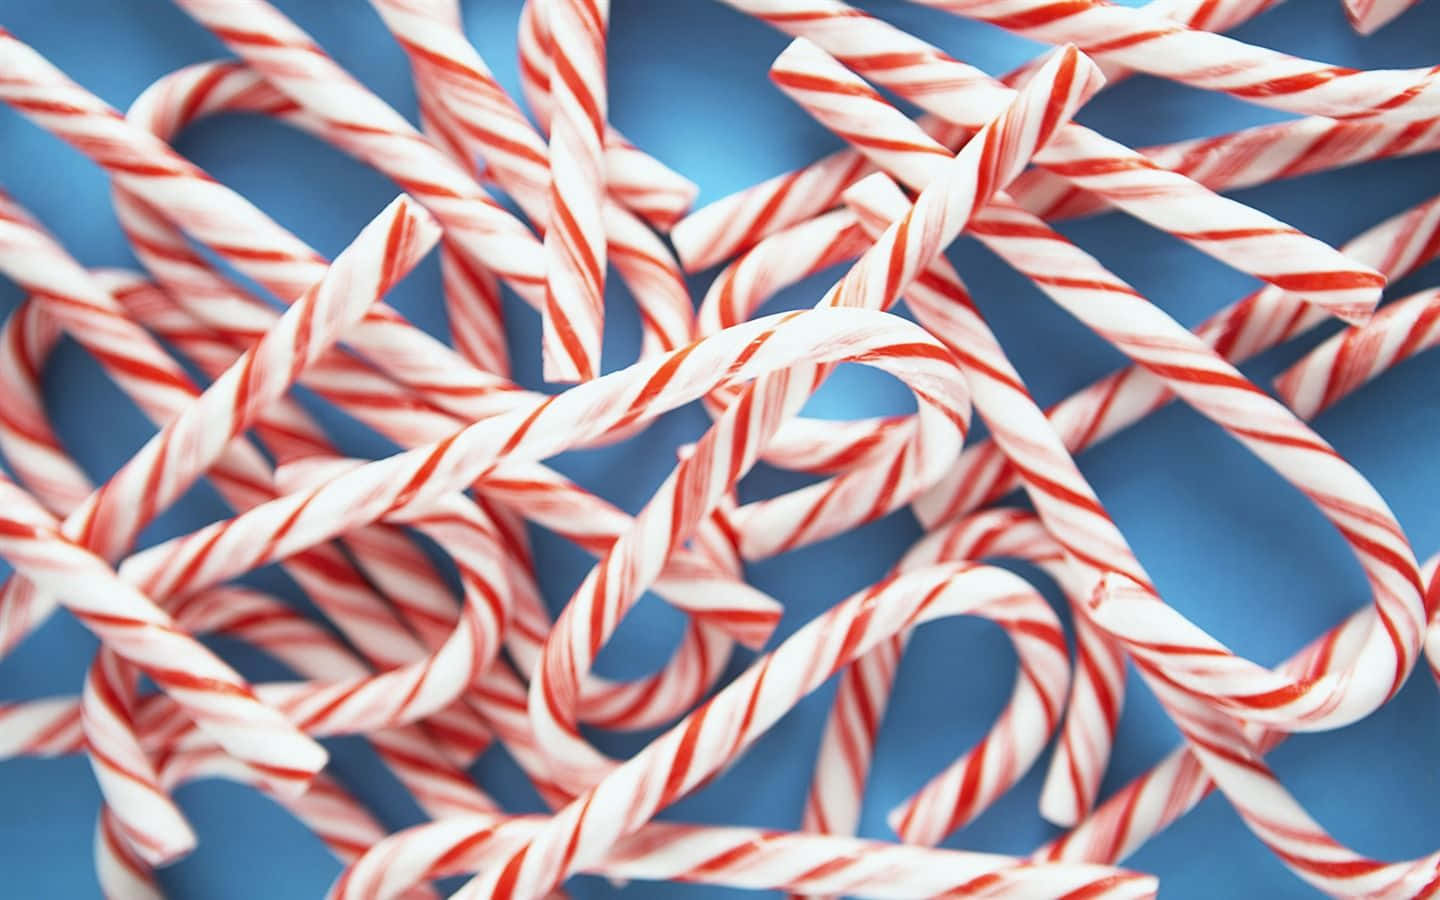 "Festive and Sweet: Candy Cane"